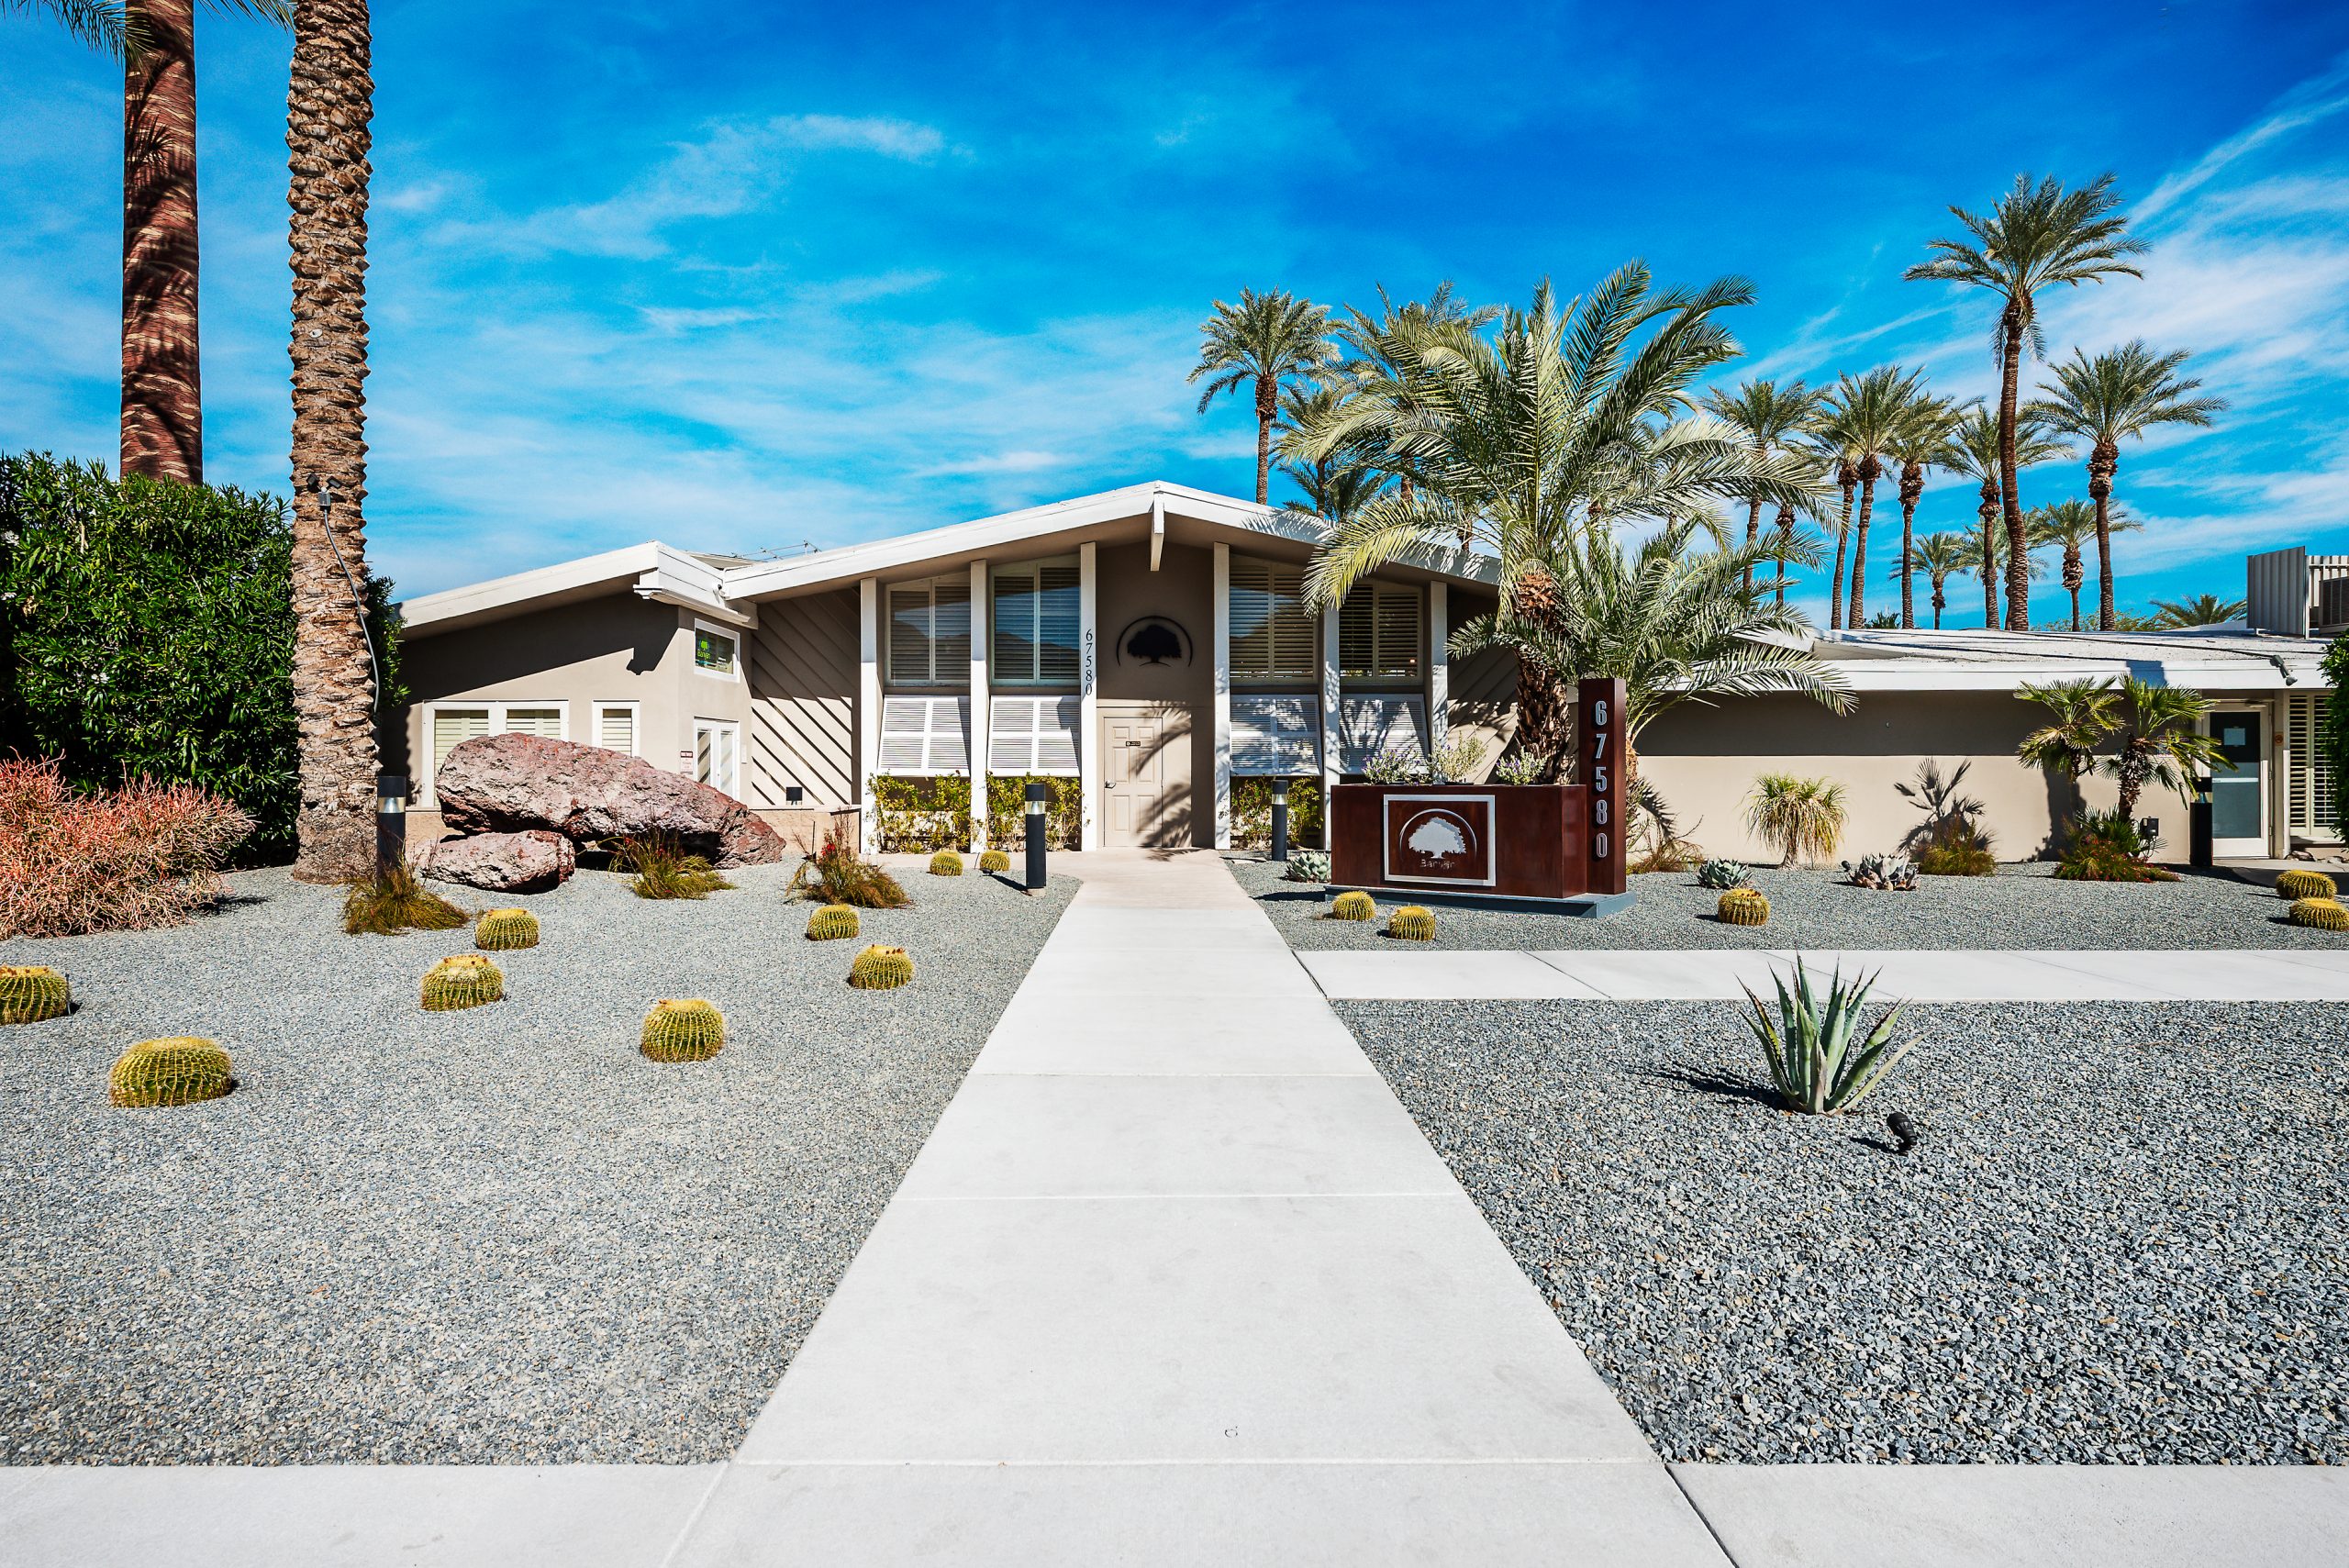 Palm Springs Rehab for Addiction | Banyan Treatment Centers